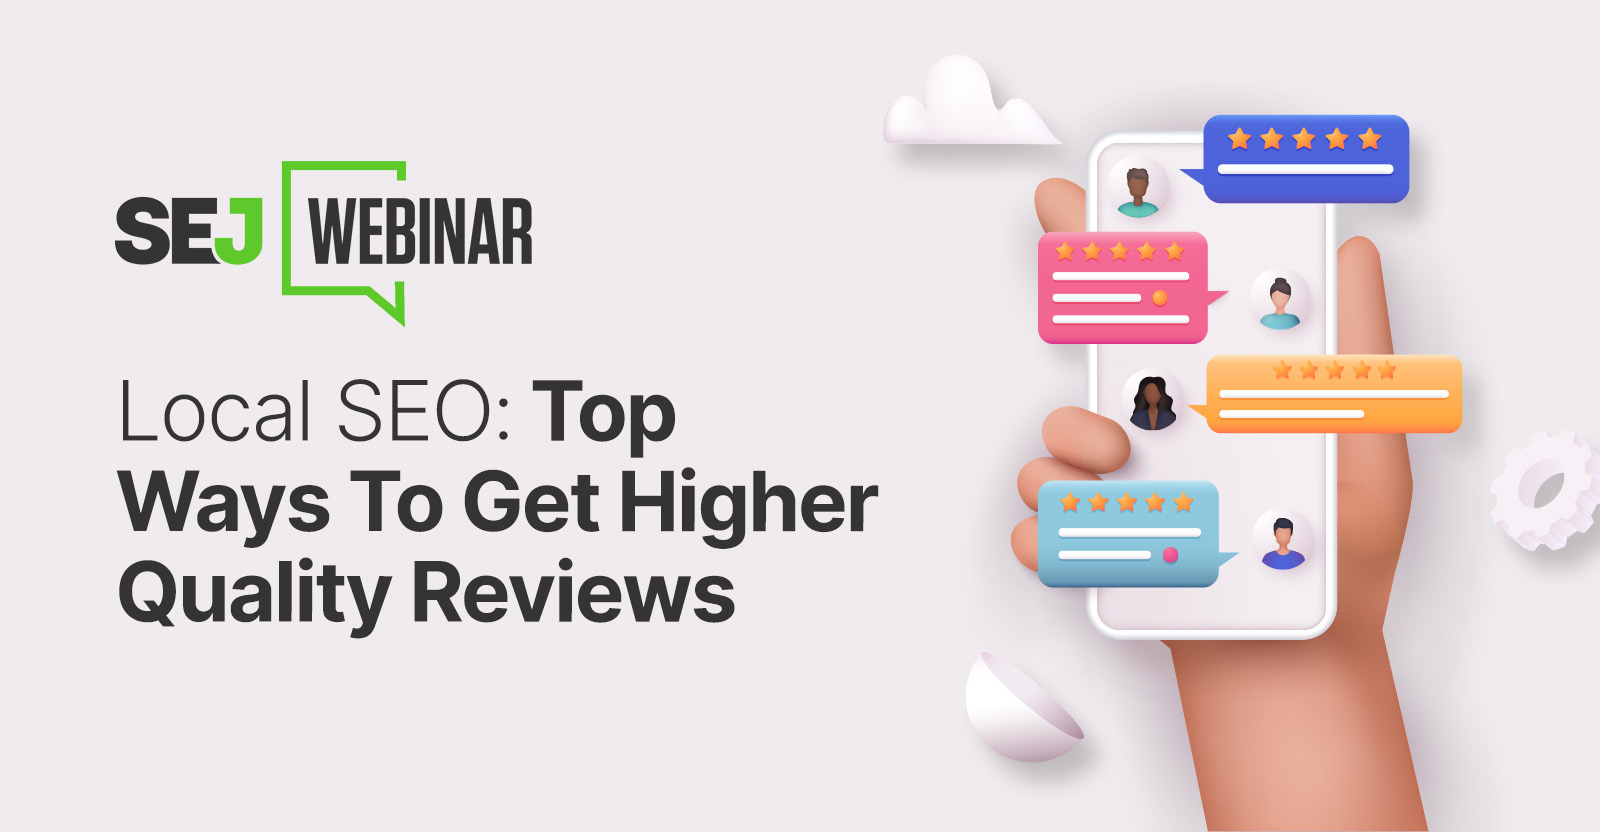 Top Ways To Get Higher Quality Reviews